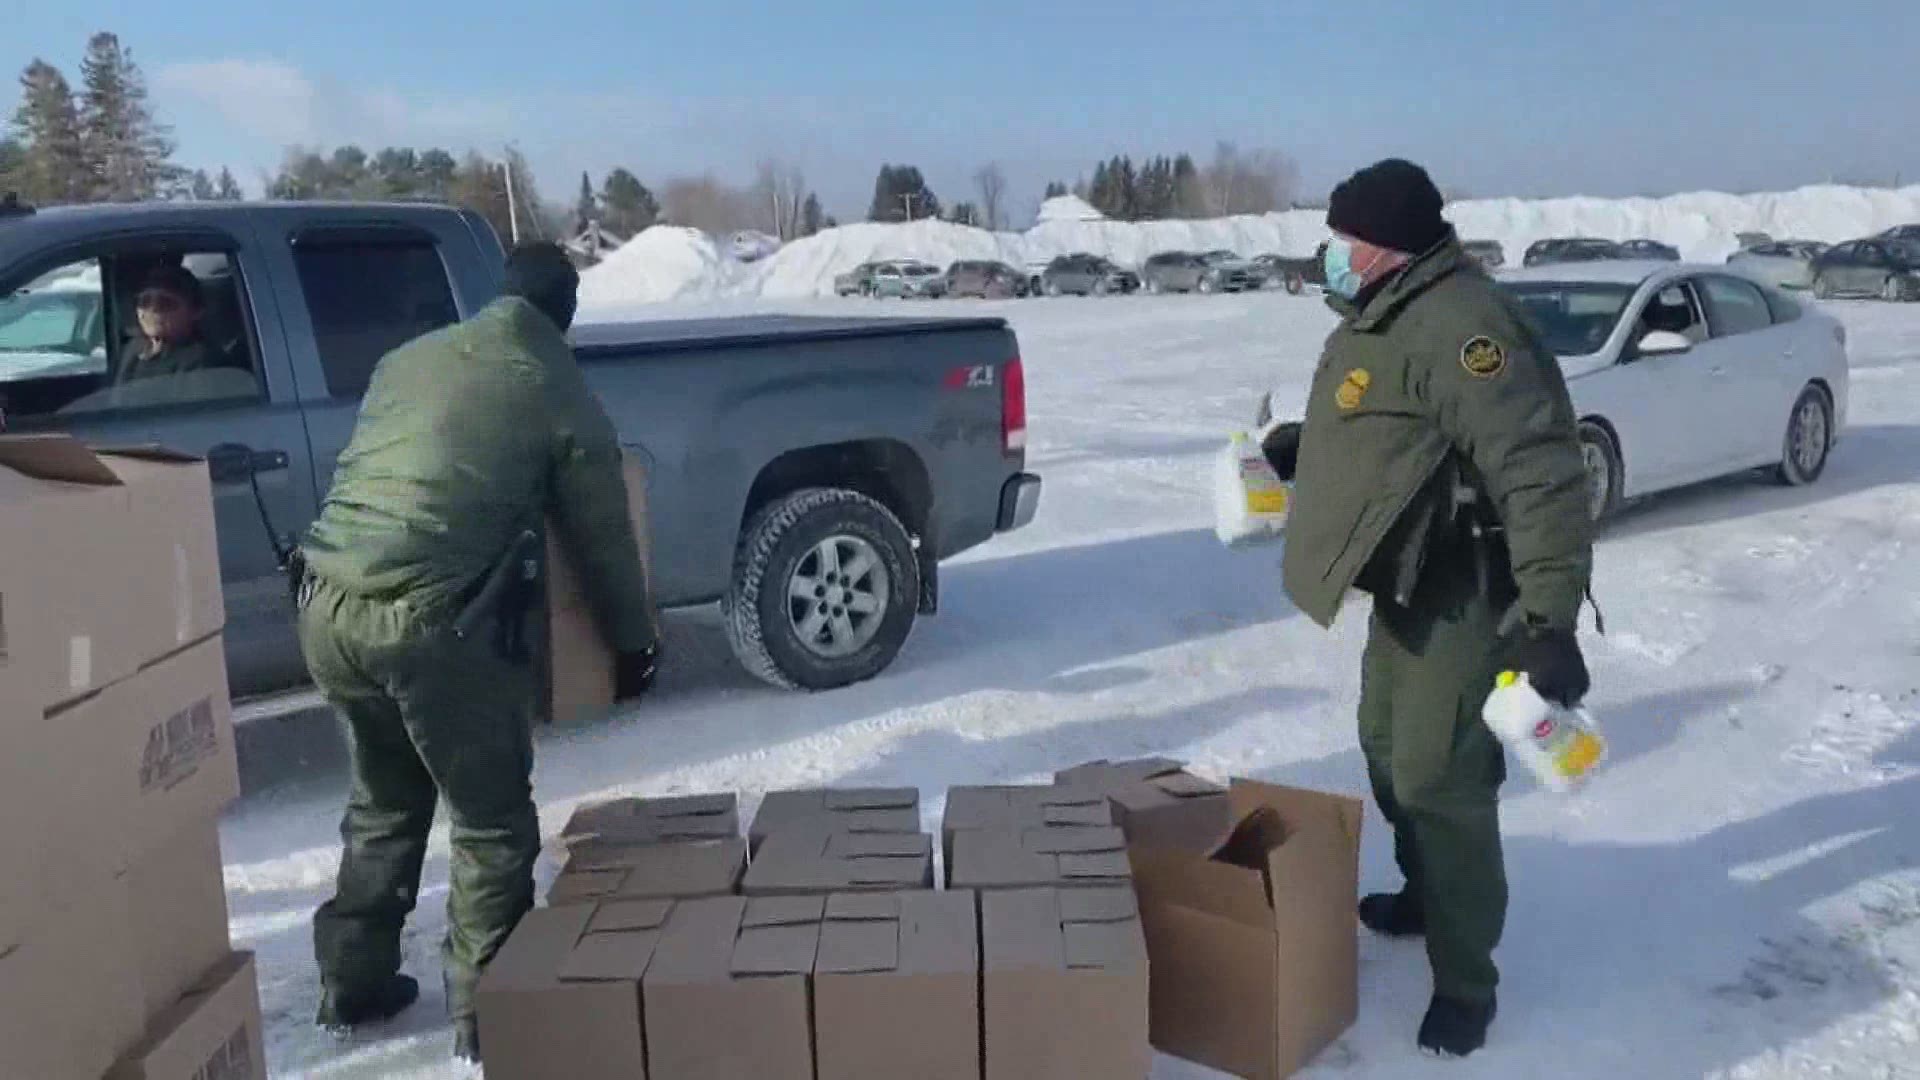 In northern Maine, Border Patrol agents have taken on an additional duty to help feed mainers.